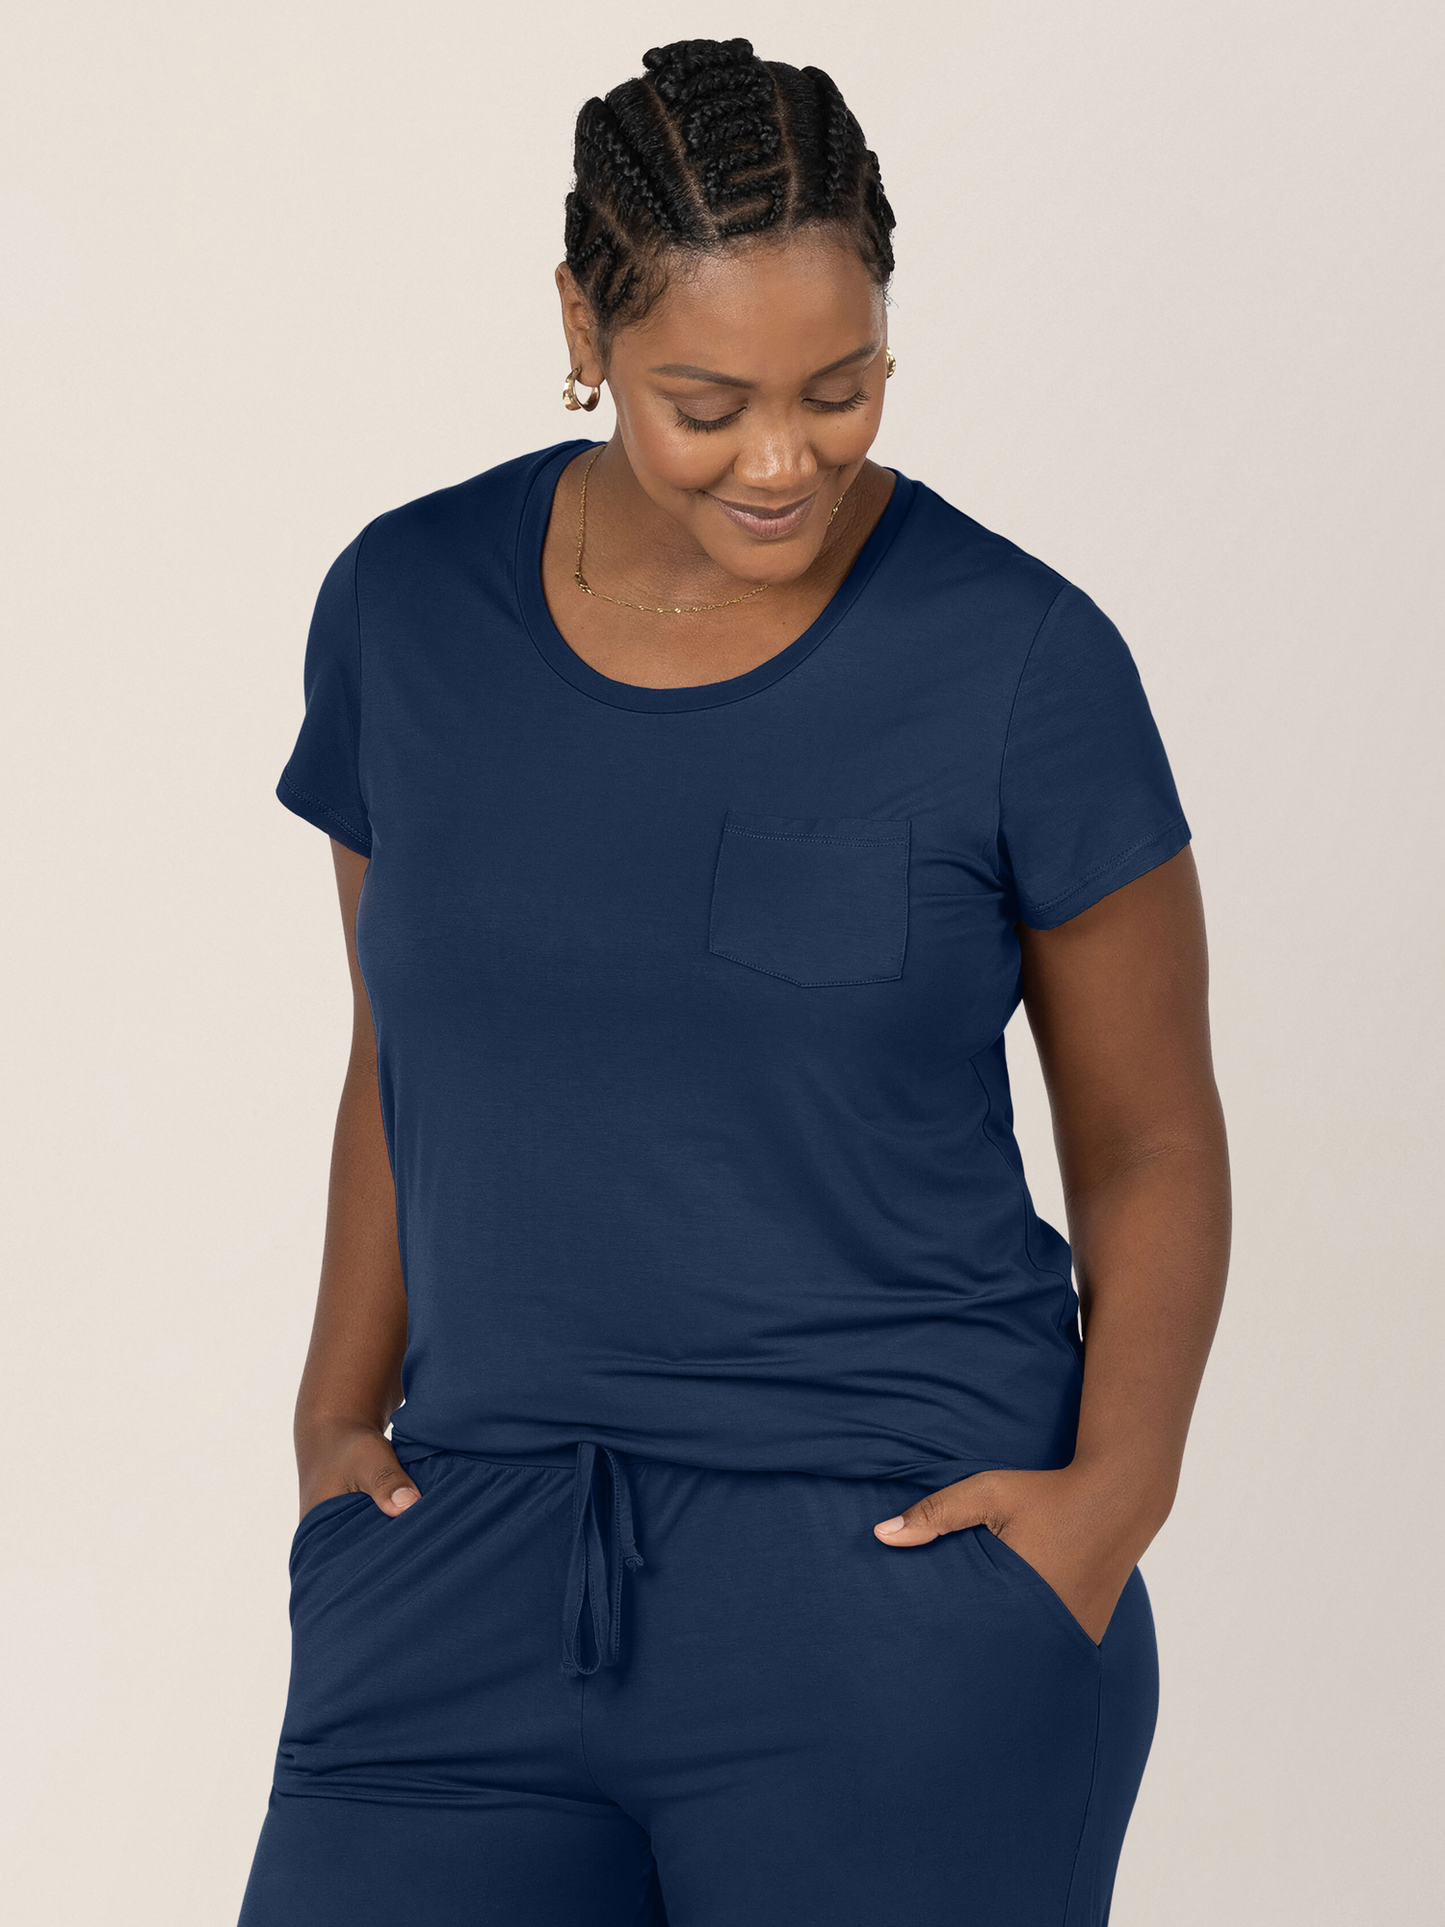 Model looking down with her hands in her pant pockets while wearing the Everyday Maternity & Nursing T-shirt in Navy